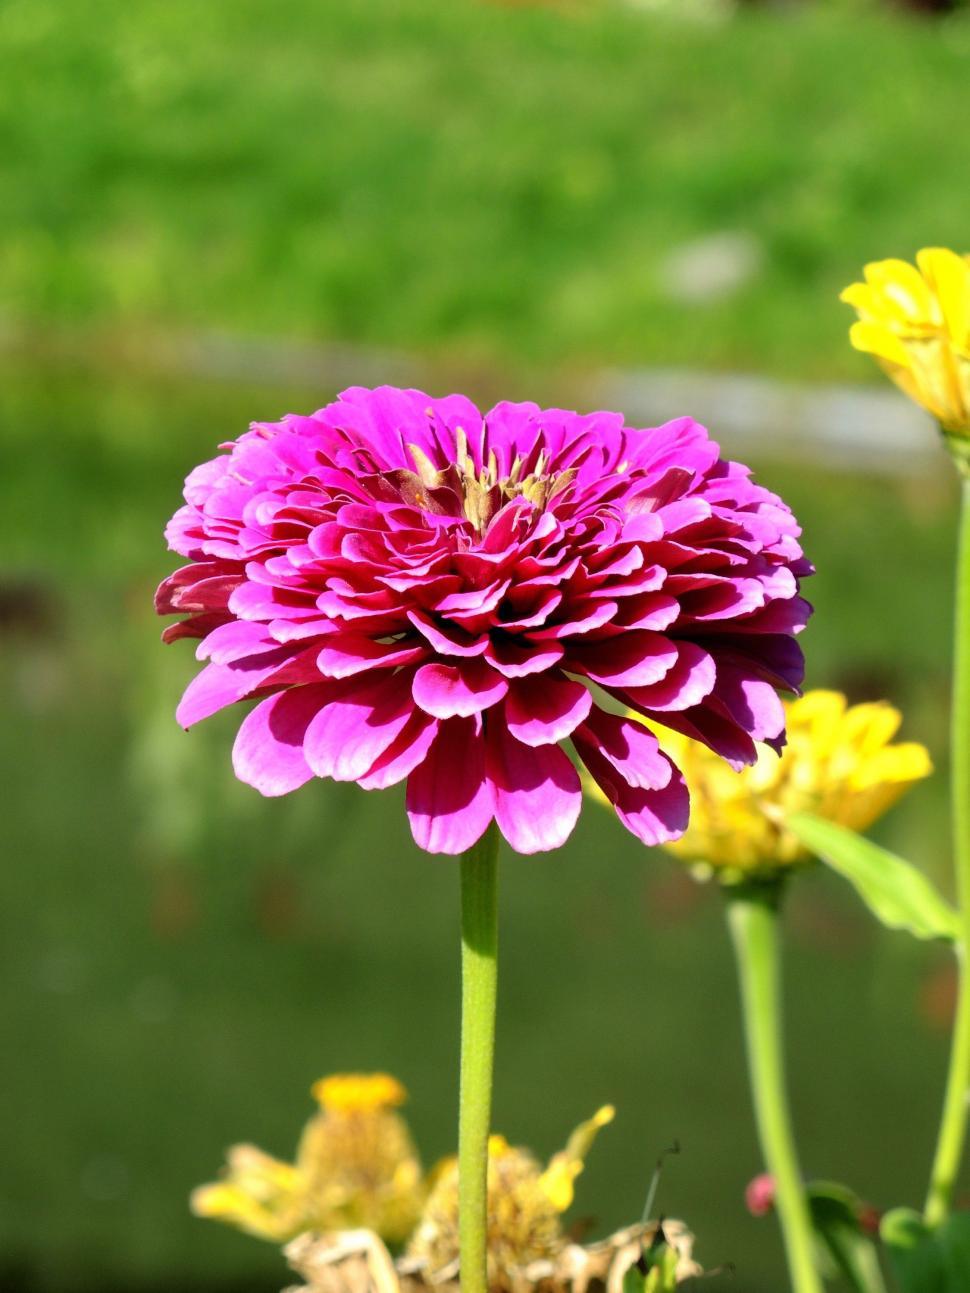 Free Image of Pink Flower with stem  